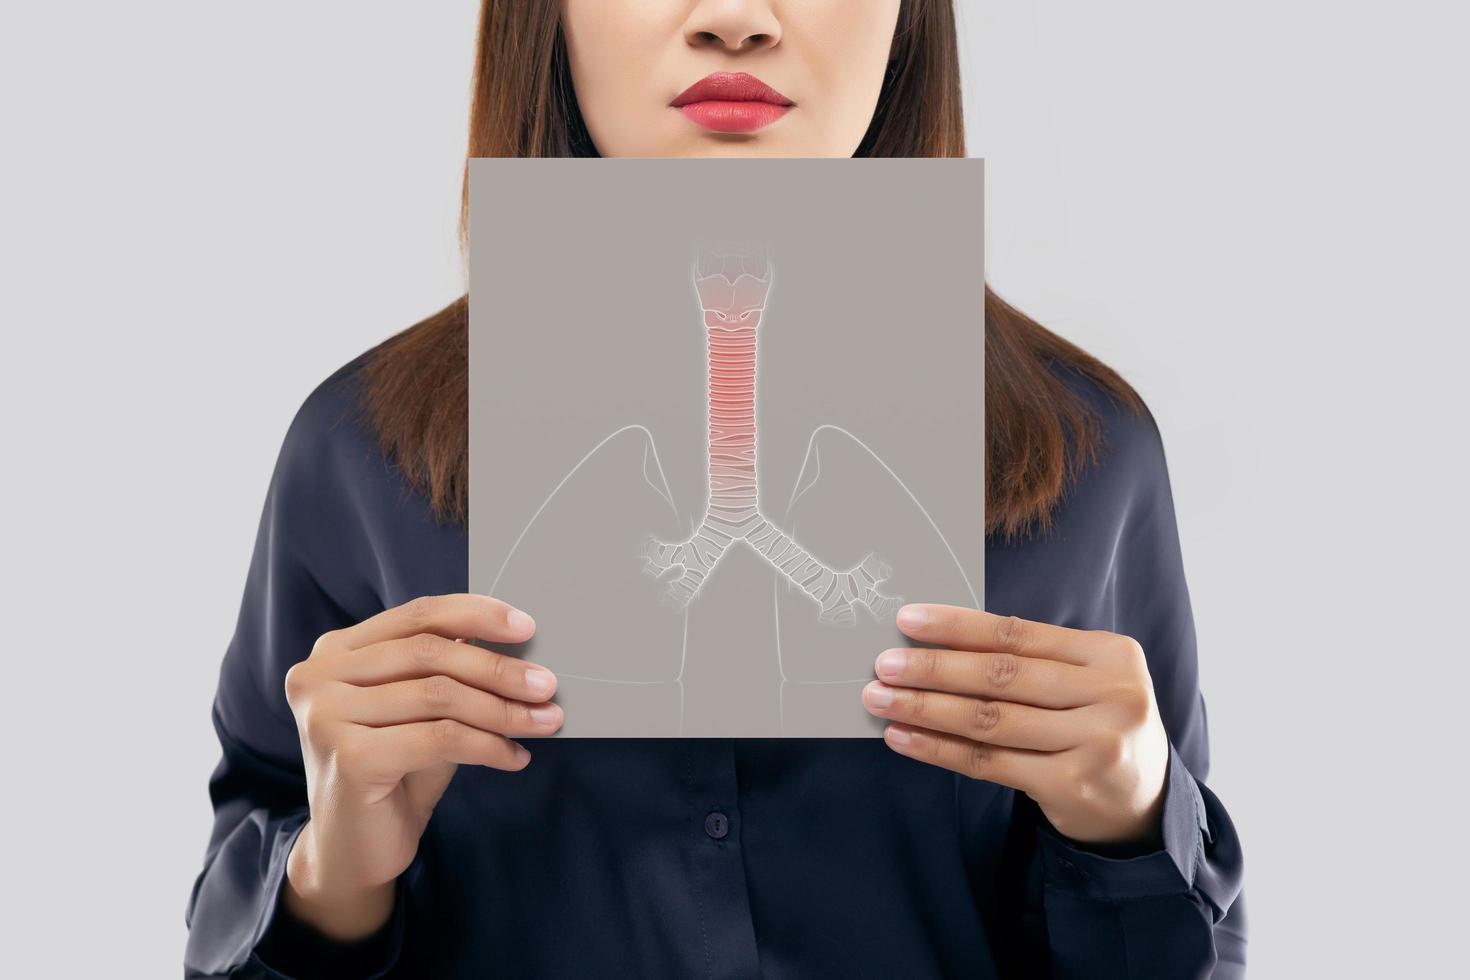 Asian woman holding a white paper trachea and lungs picture of his mouth against the gray background. Bronchitis symptoms. Concept with healthcare and medicine. photo